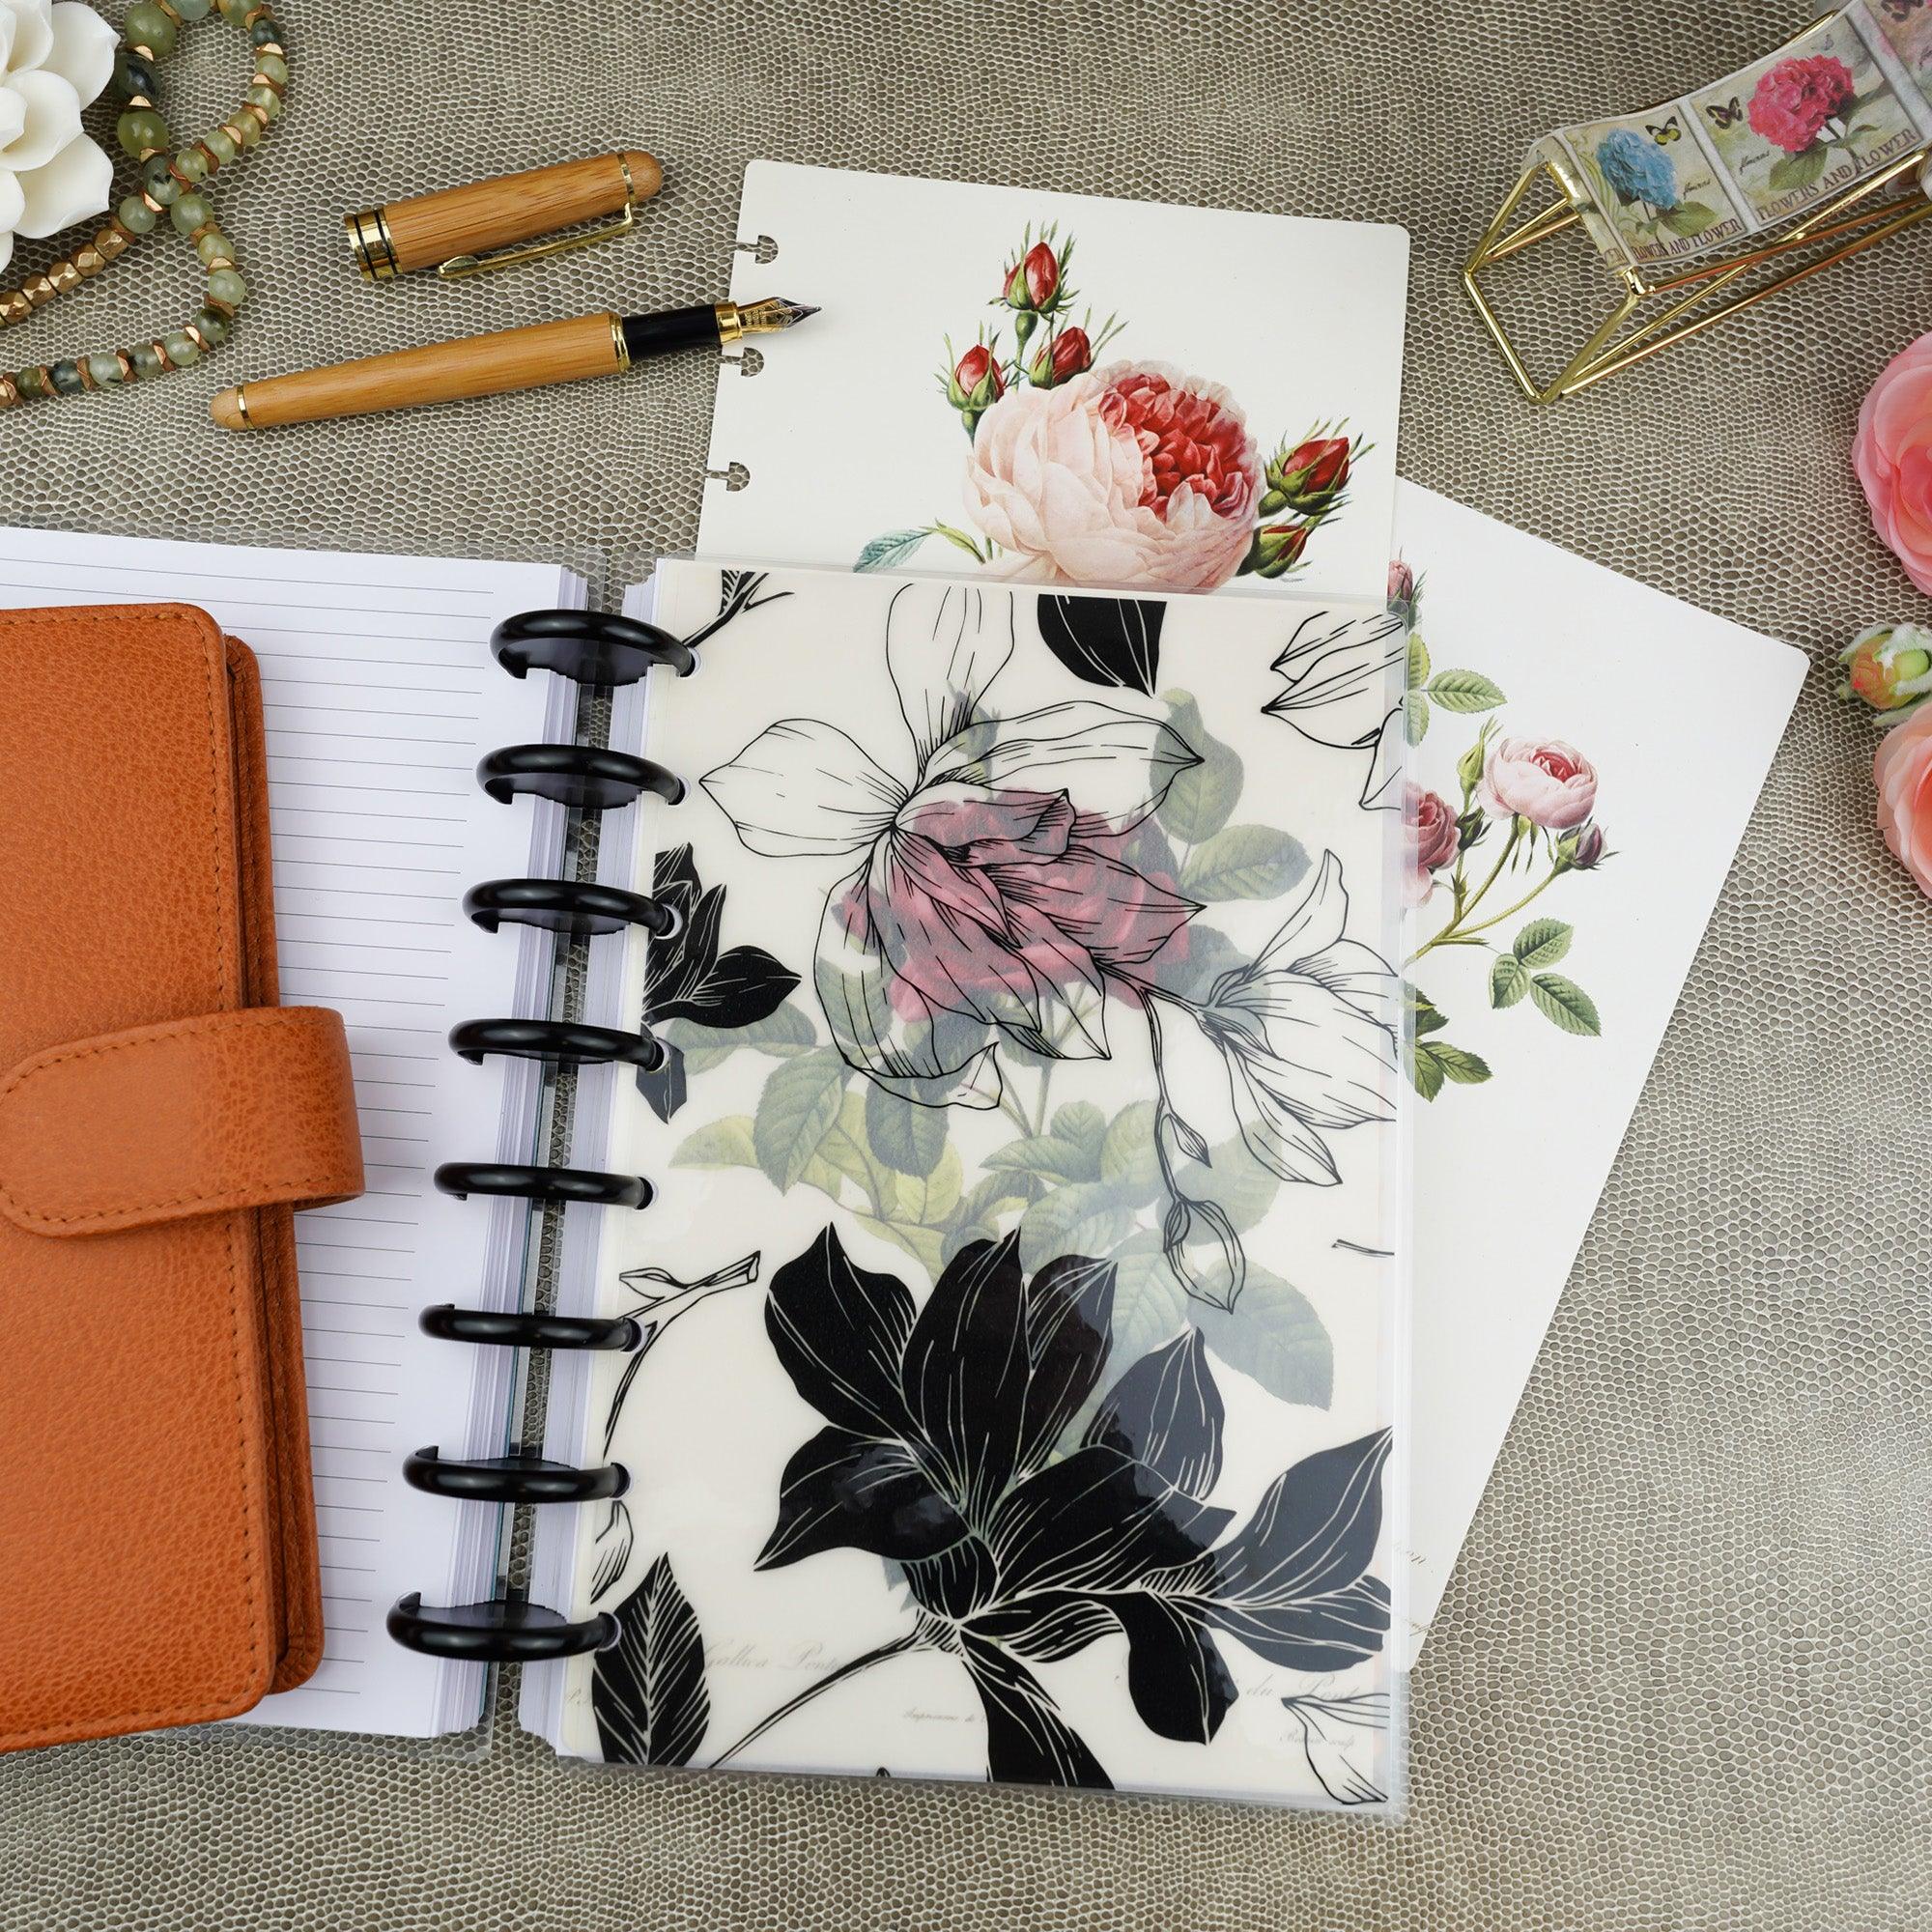 Magnolia floral printed planner dashboard for discbound and six ring planner systems by Jane's Agenda®.